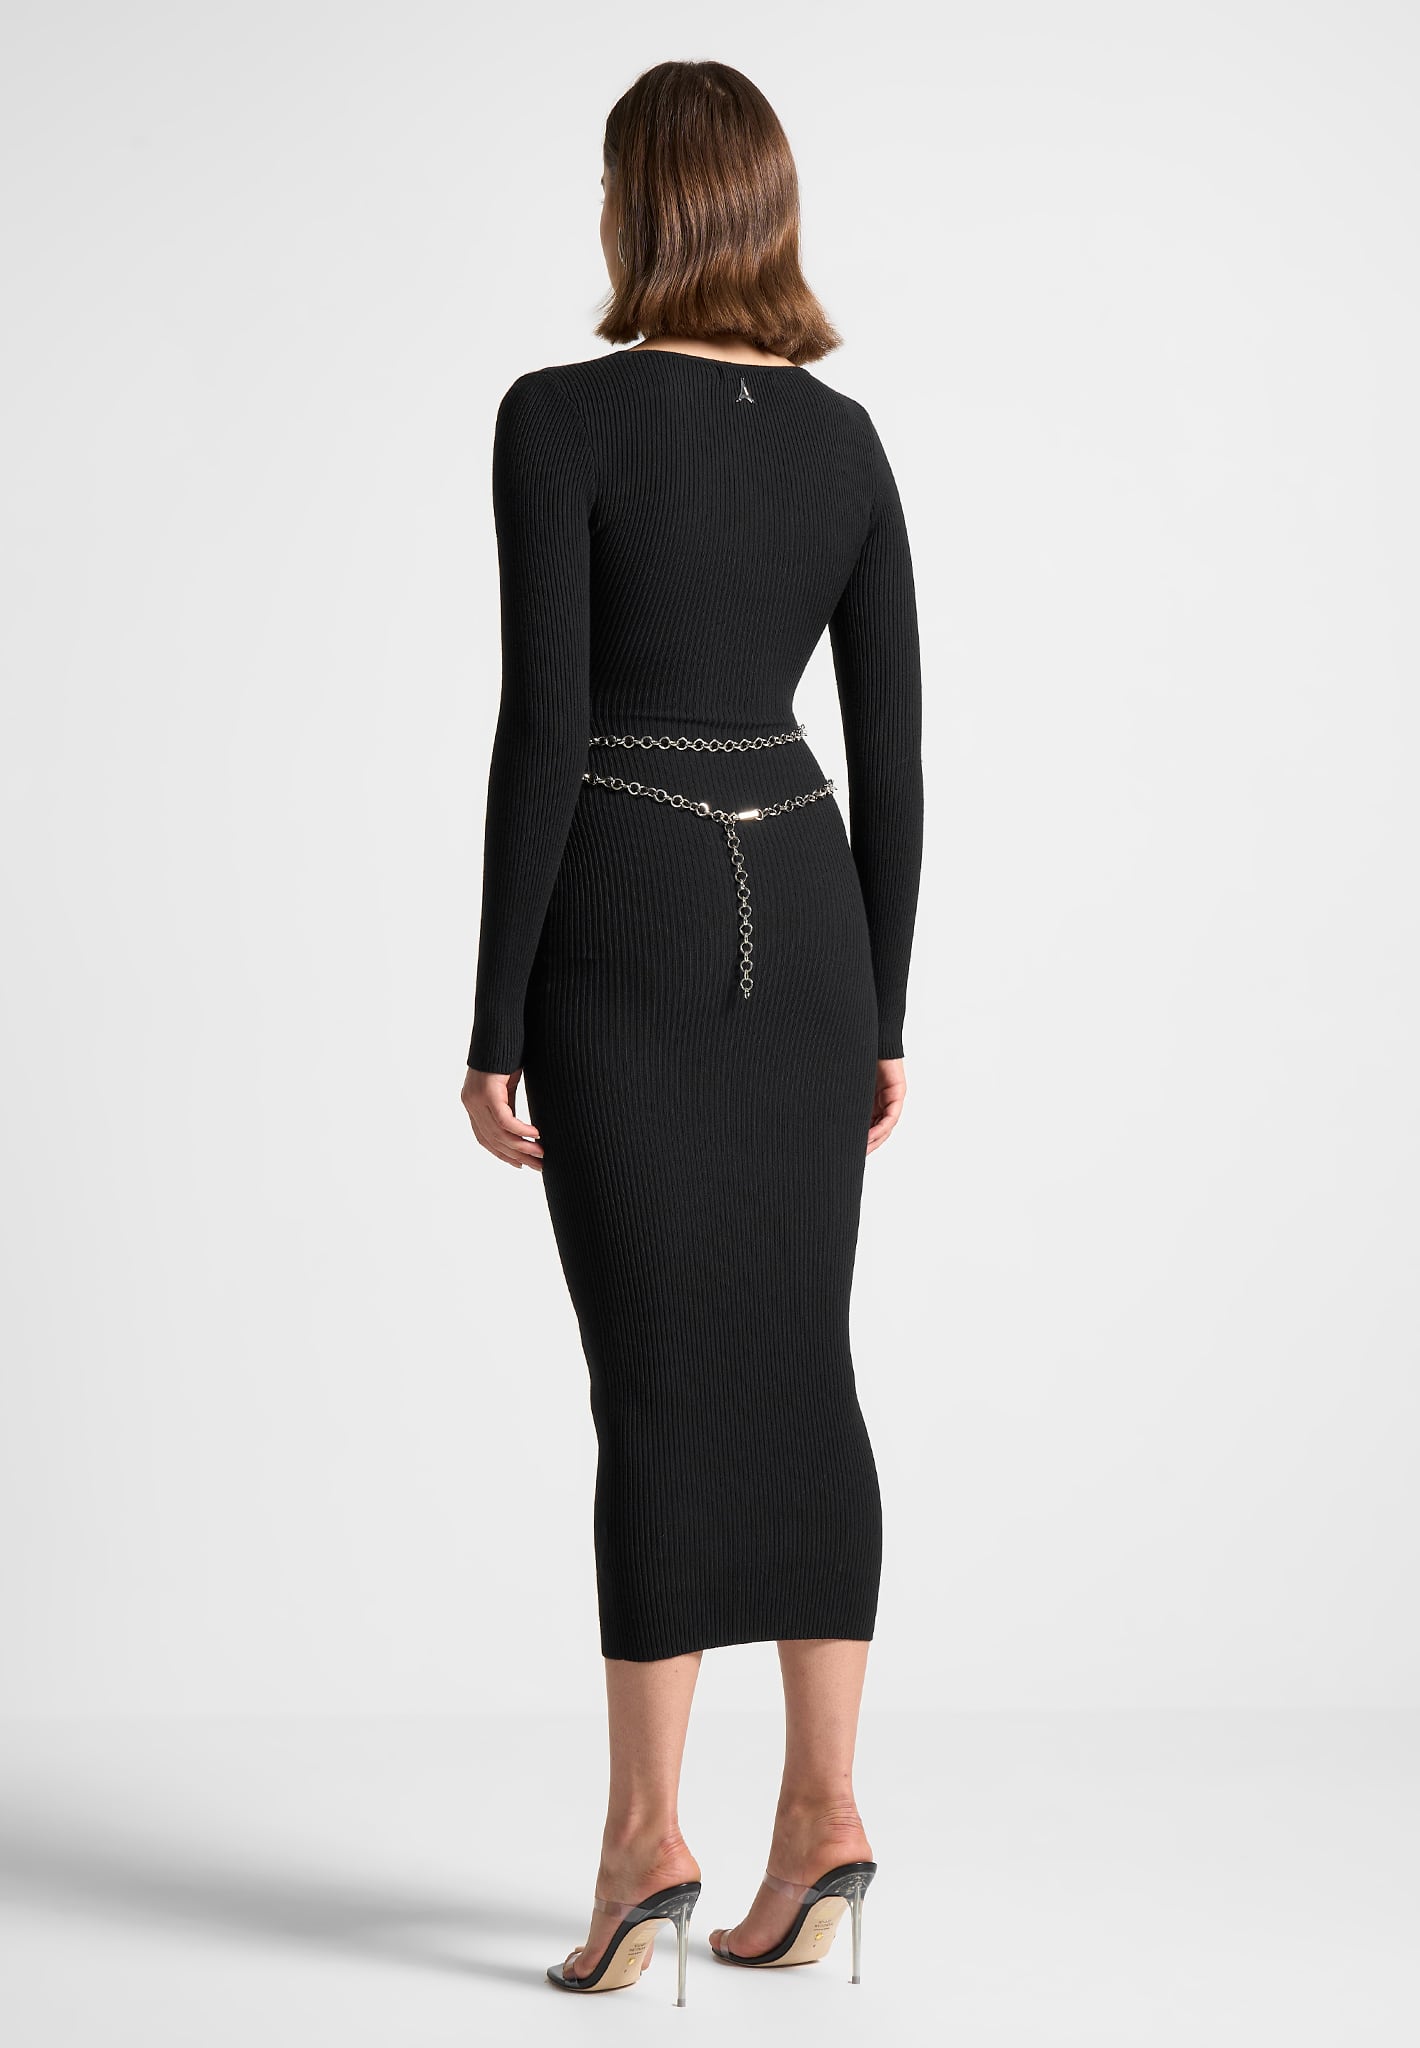 ribbed-knit-midaxi-dress-with-chain-belt-black